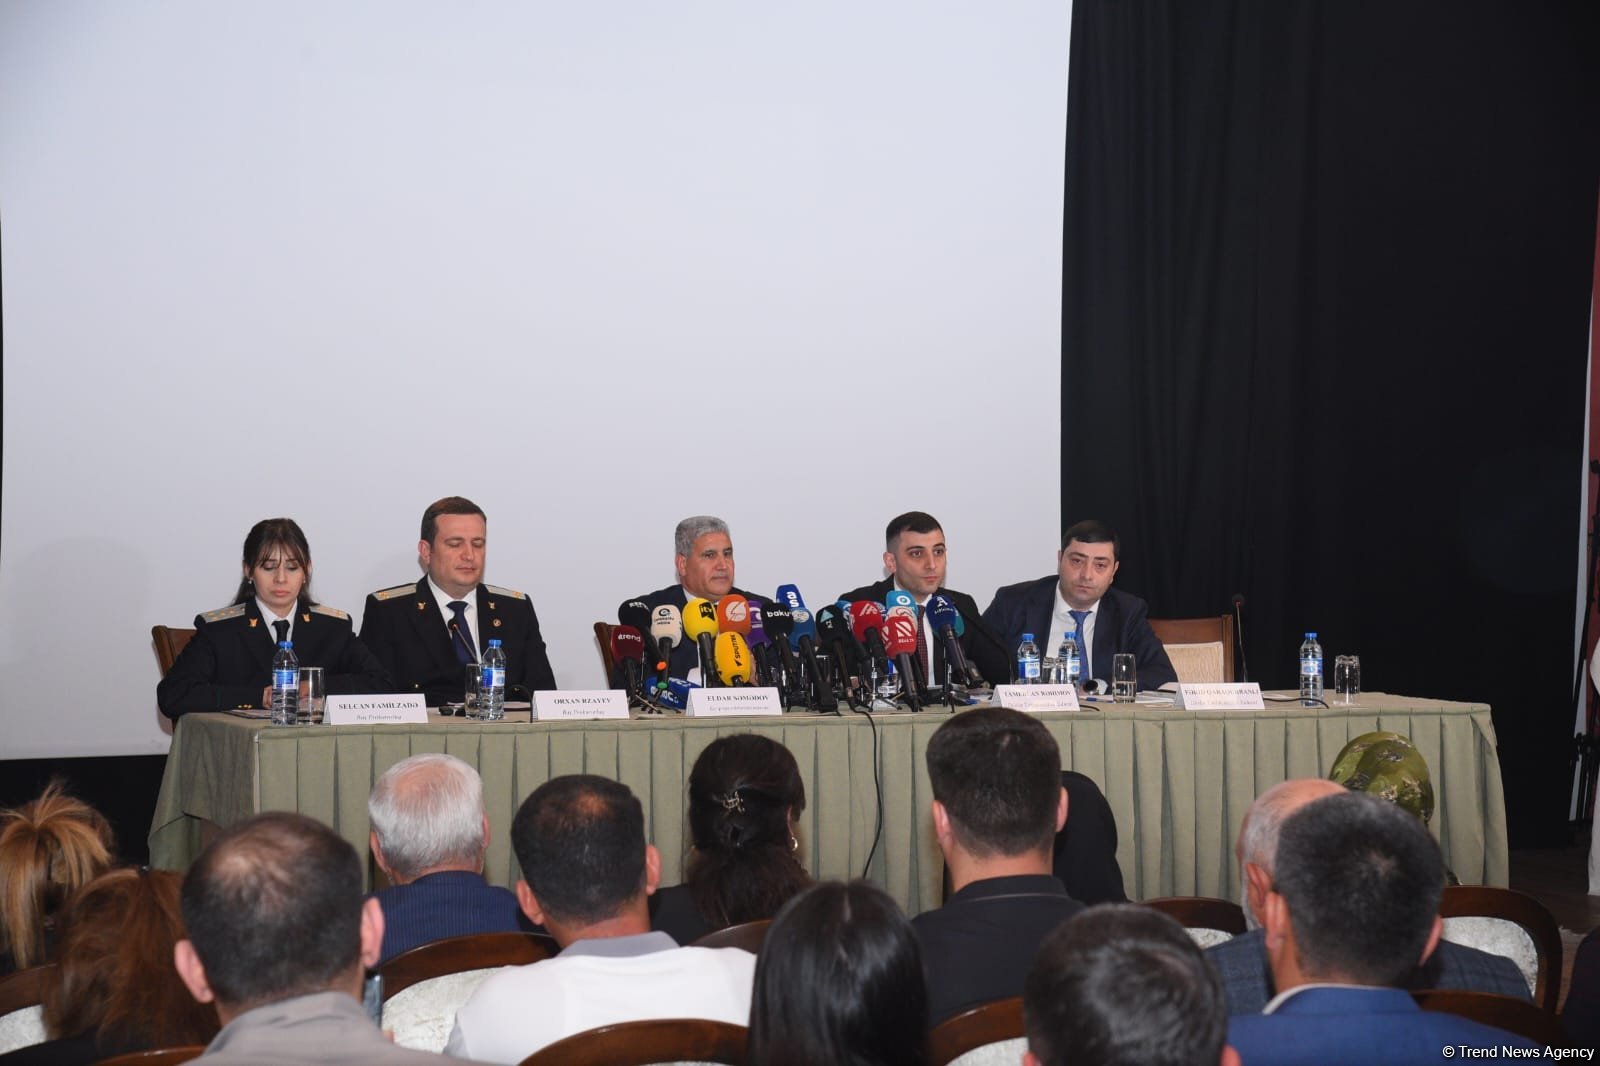 Baku hosts briefing on mass graves, missing persons (PHOTO)